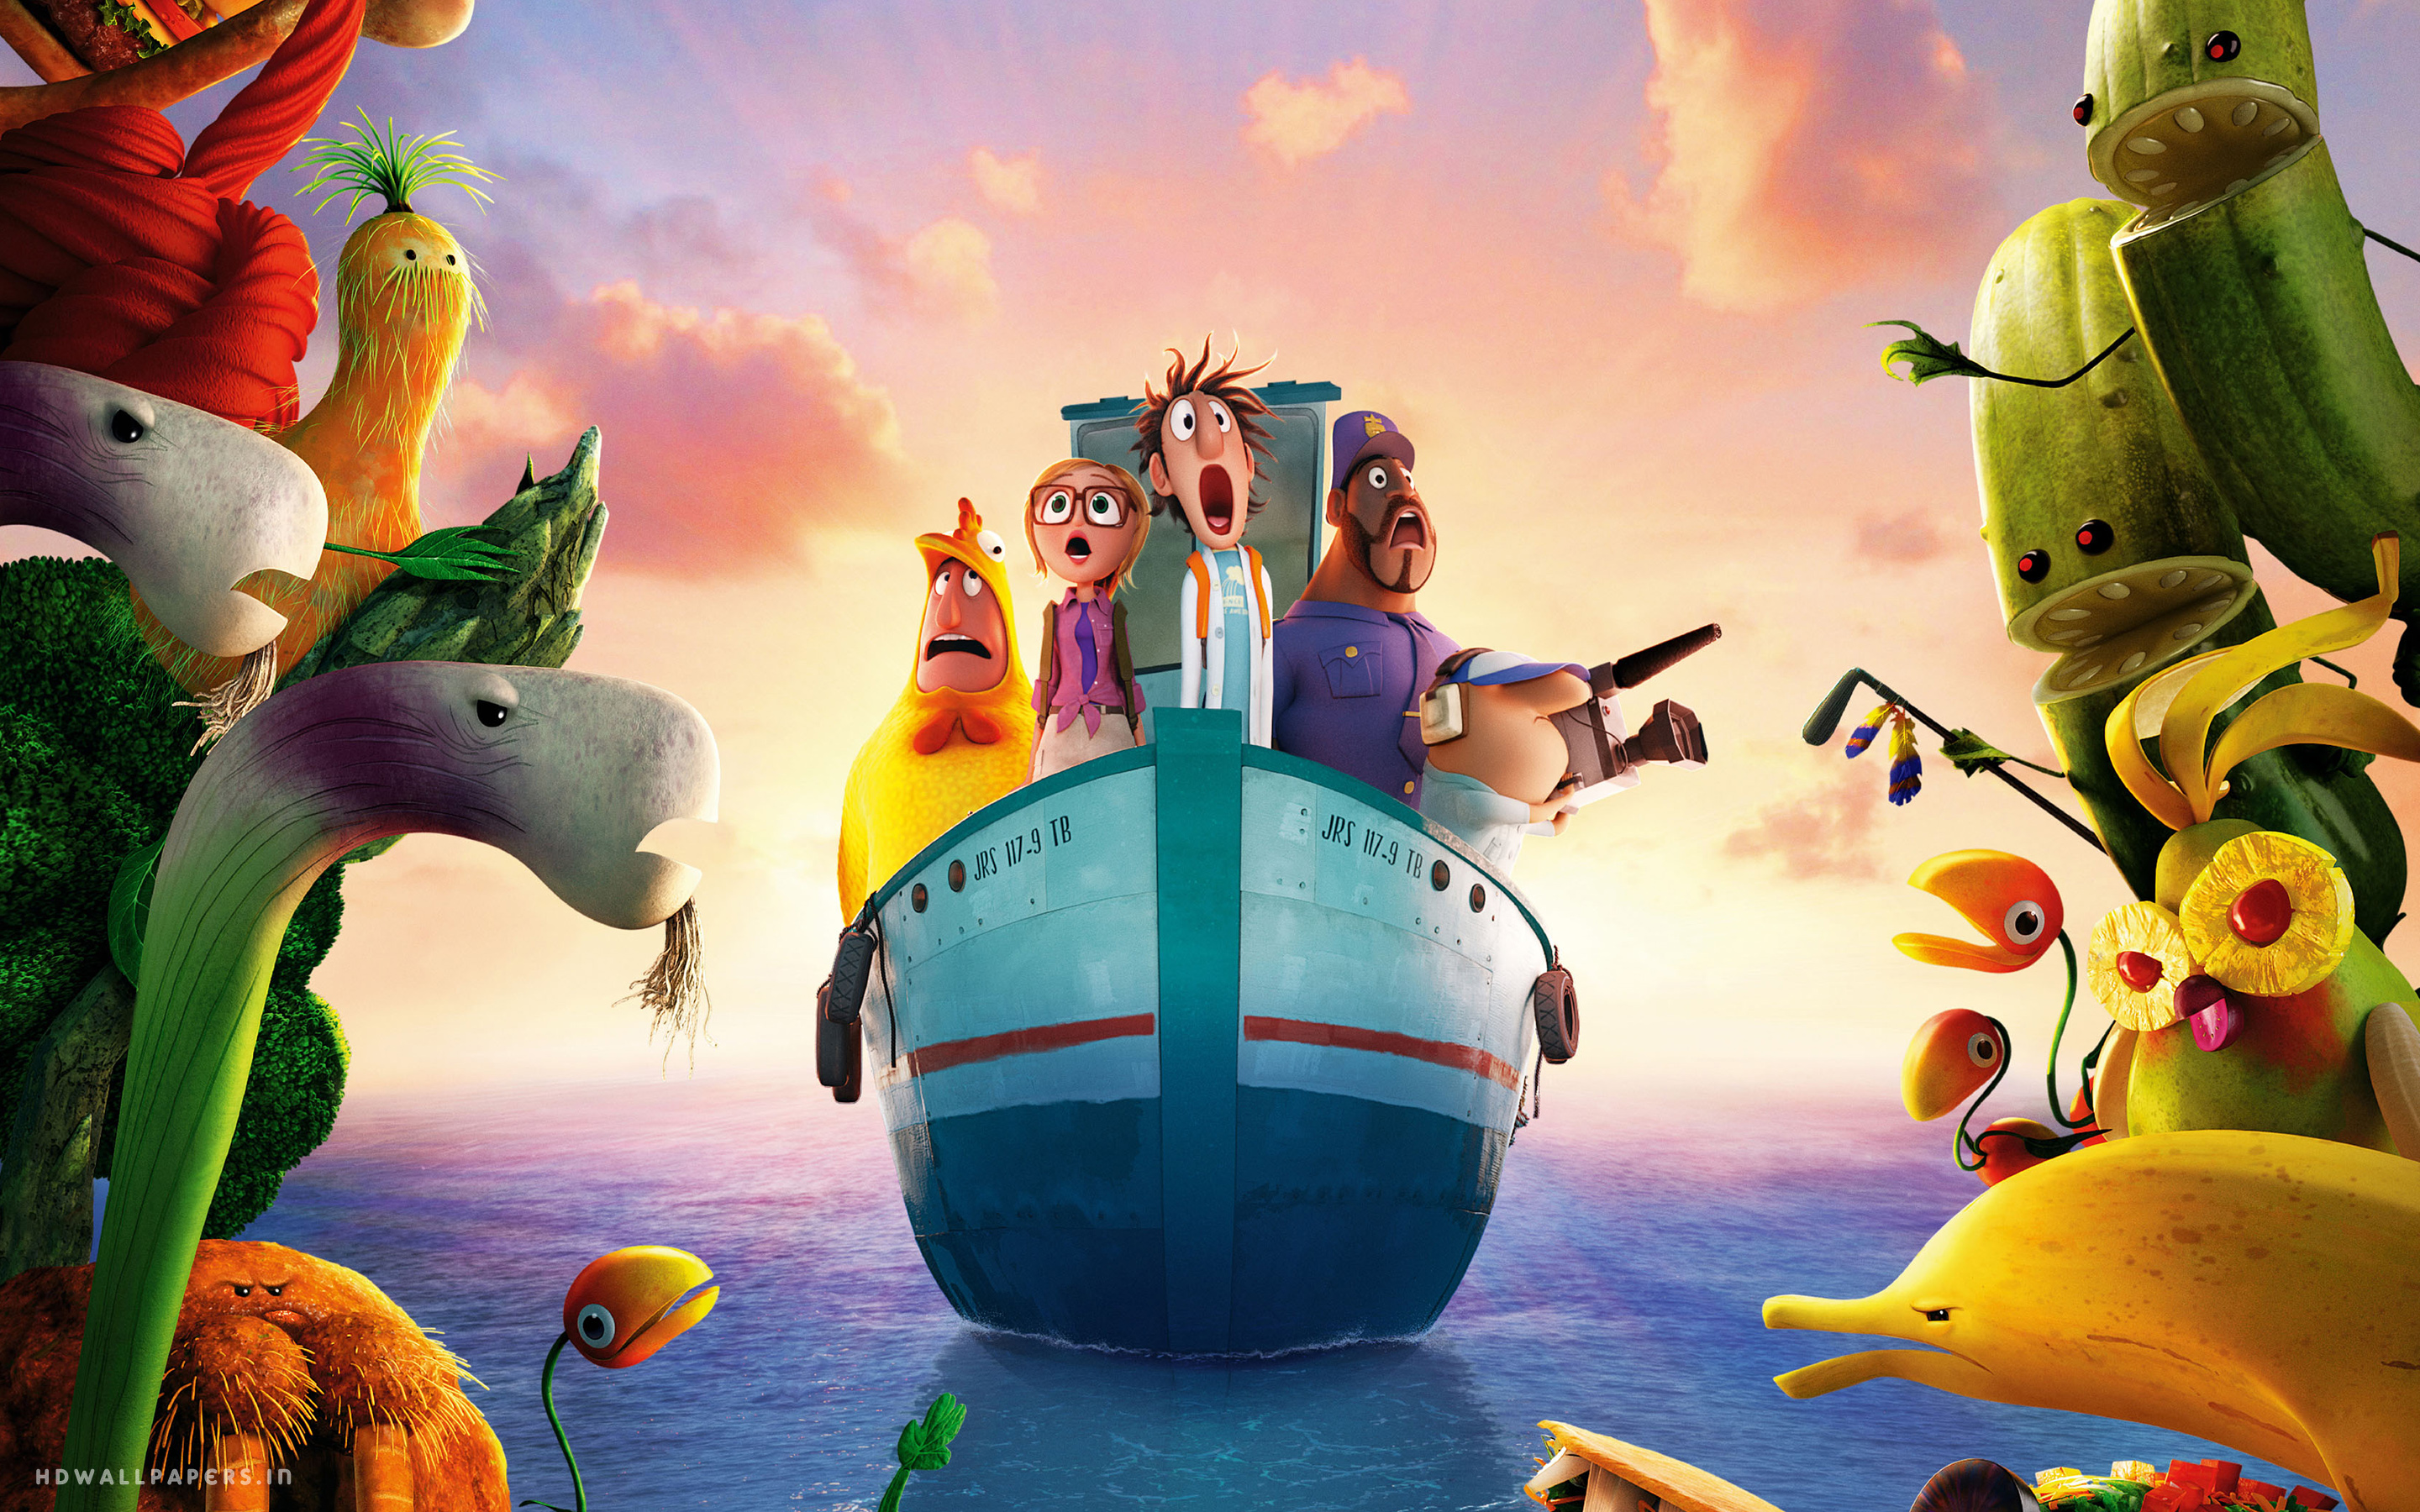 Free Movie Under the Stars – Cloudy With A Chance of Meatballs 2